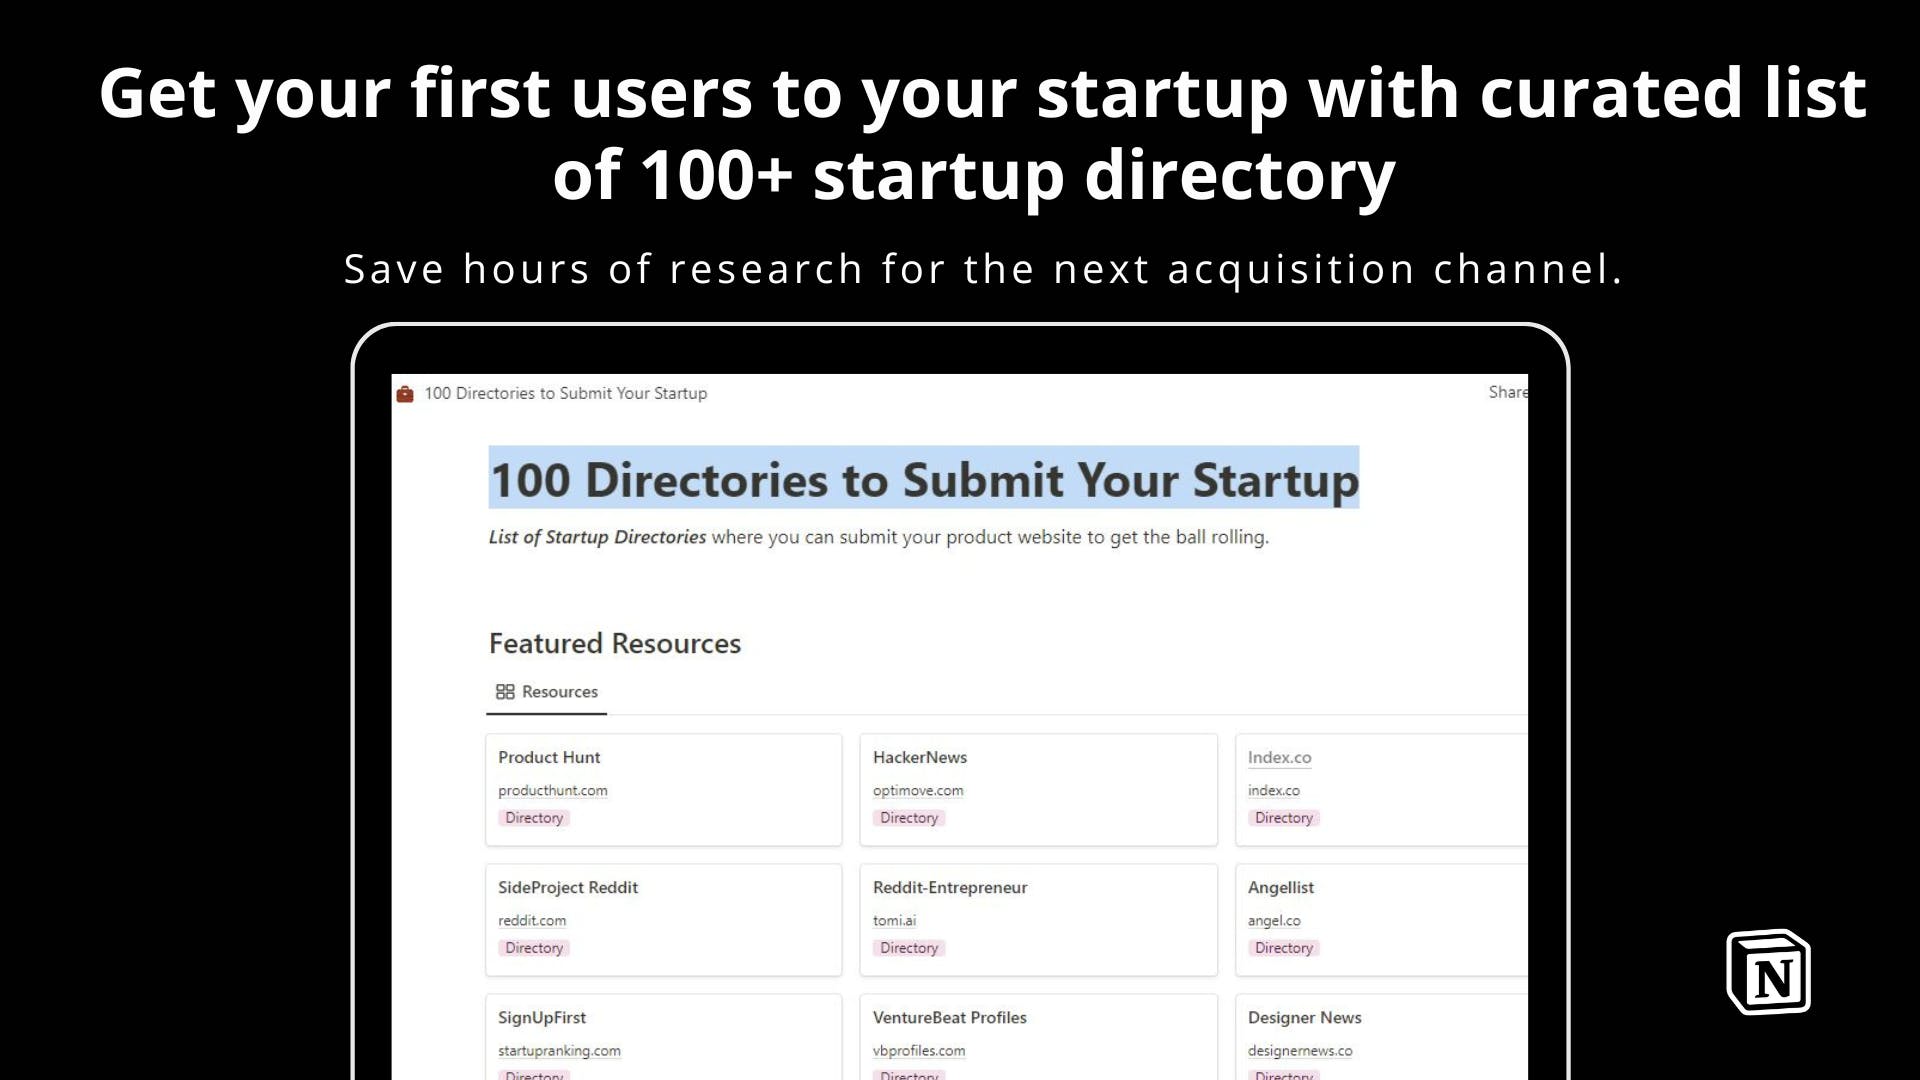 100+ Directories to Submit Your Startup media 1